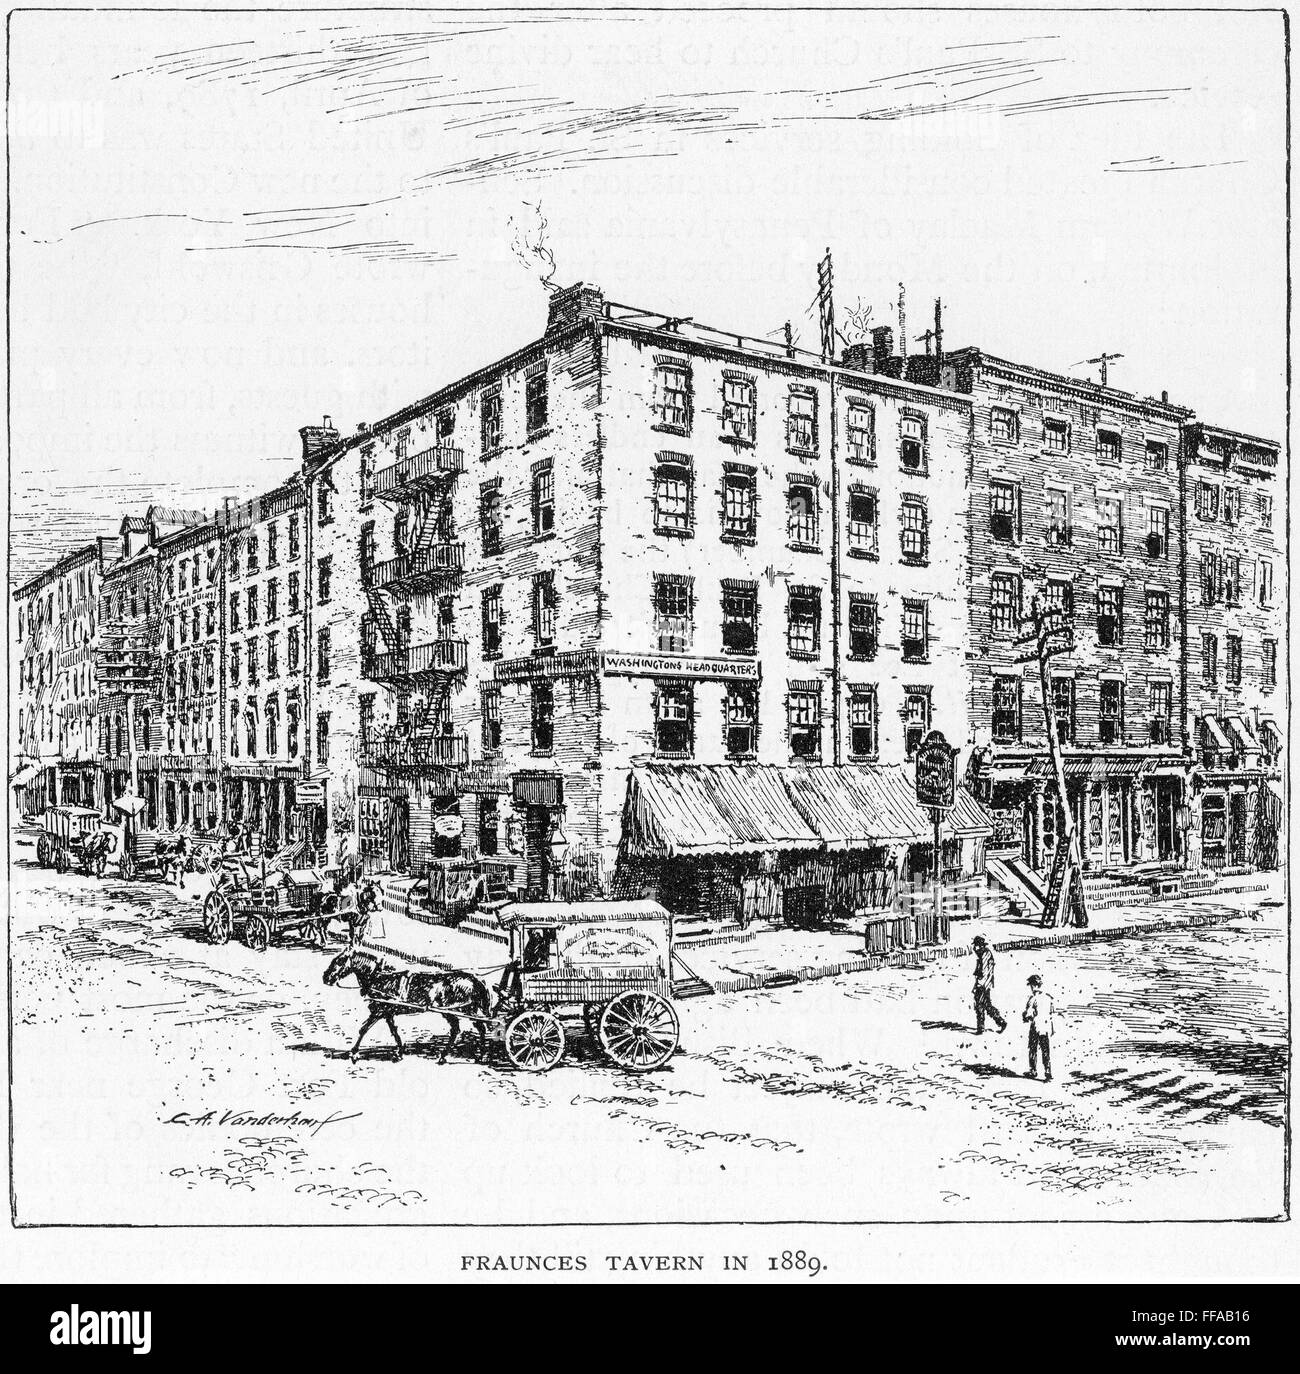 NEW YORK: FRAUNCES TAVERN. /nFraunces Tavern, at 101 Broad Street, corner of Pearl Street, where General George Washington bade farewell to his officers on 4 December 1783. Drawing, 1889. Stock Photo